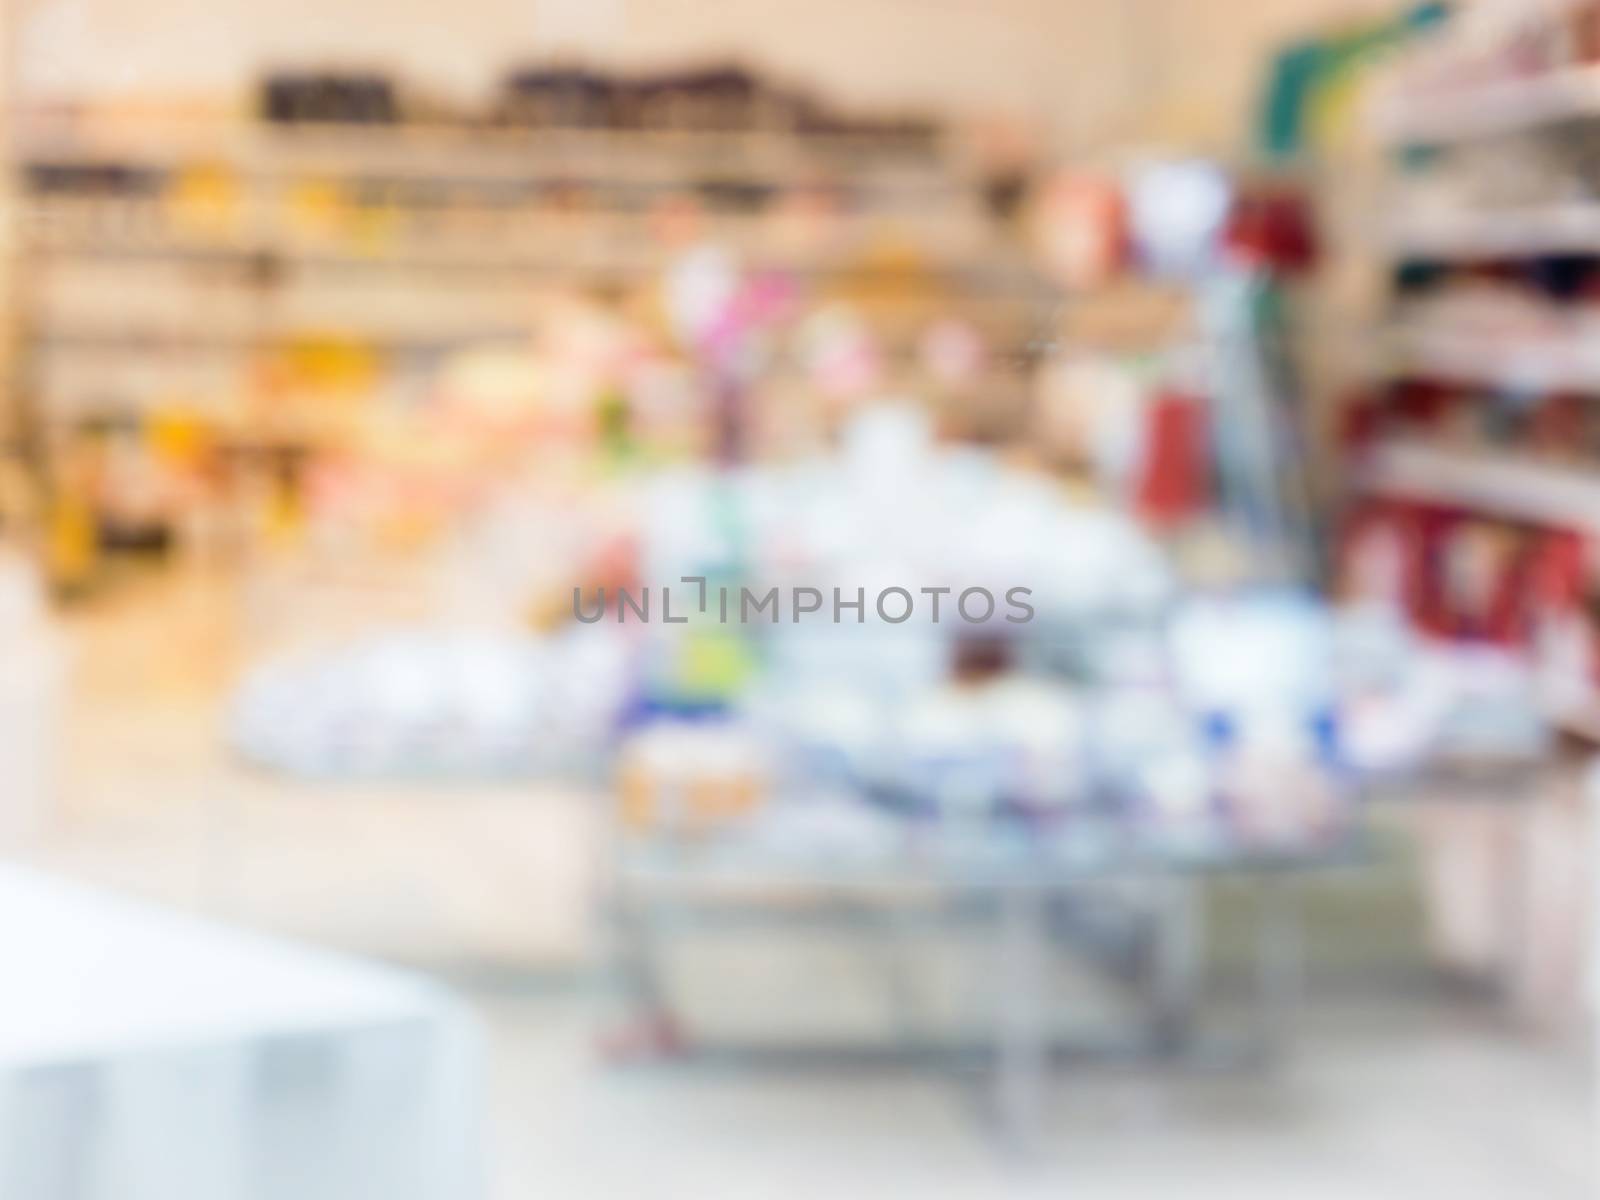 Blurred colorful products in abstract shop - background with shallow DOF